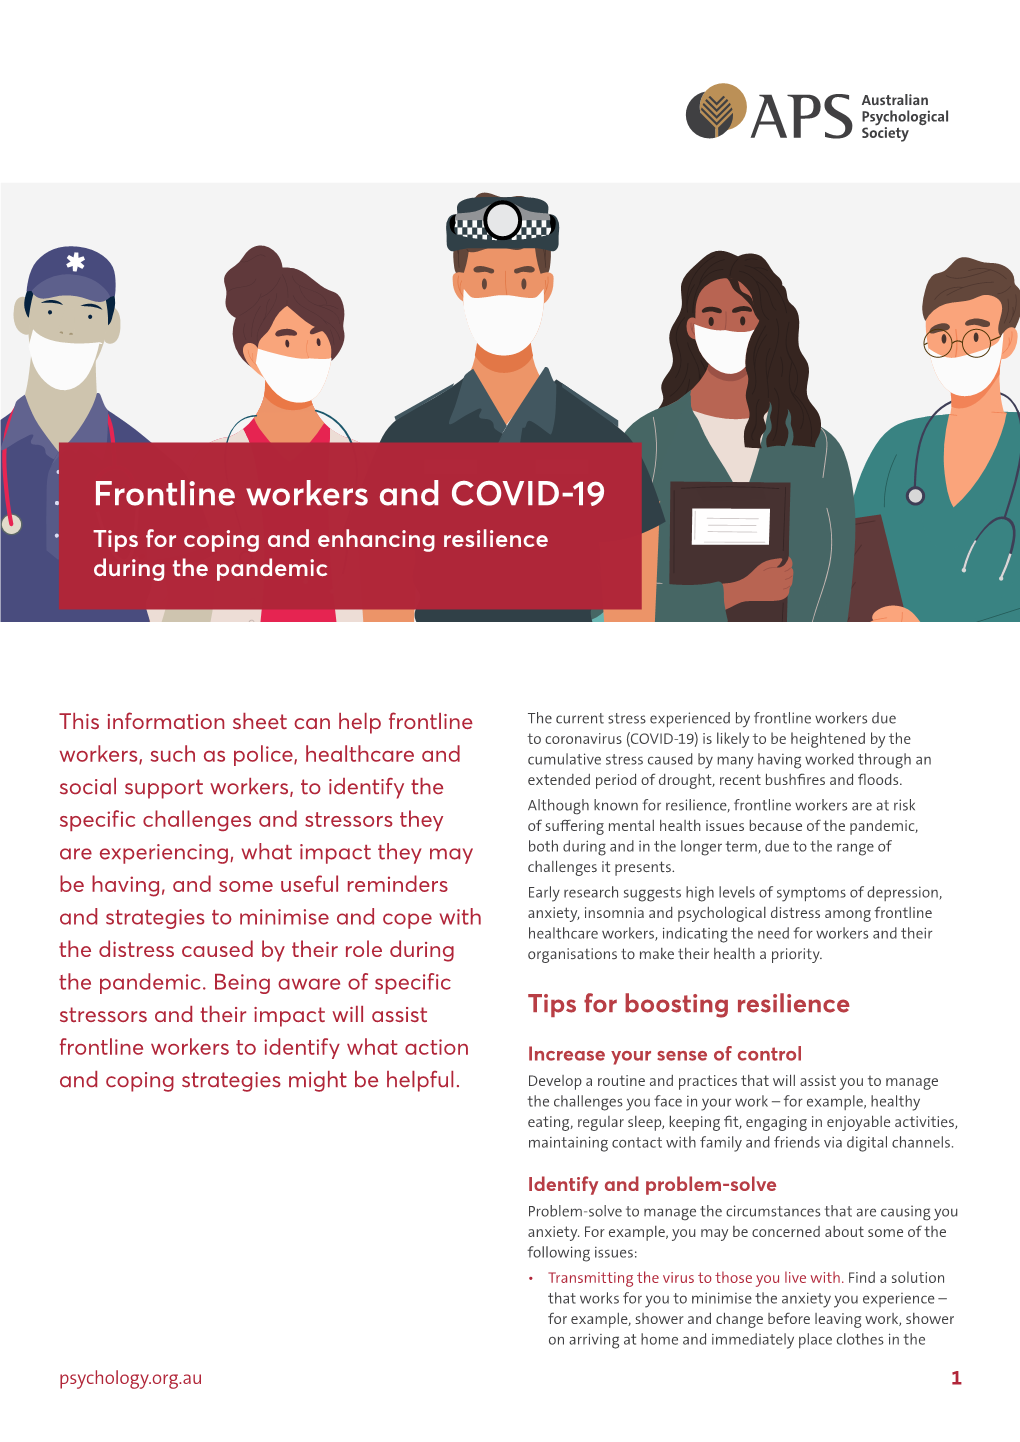 Frontline Workers and COVID-19 Tips for Coping and Enhancing Resilience During the Pandemic